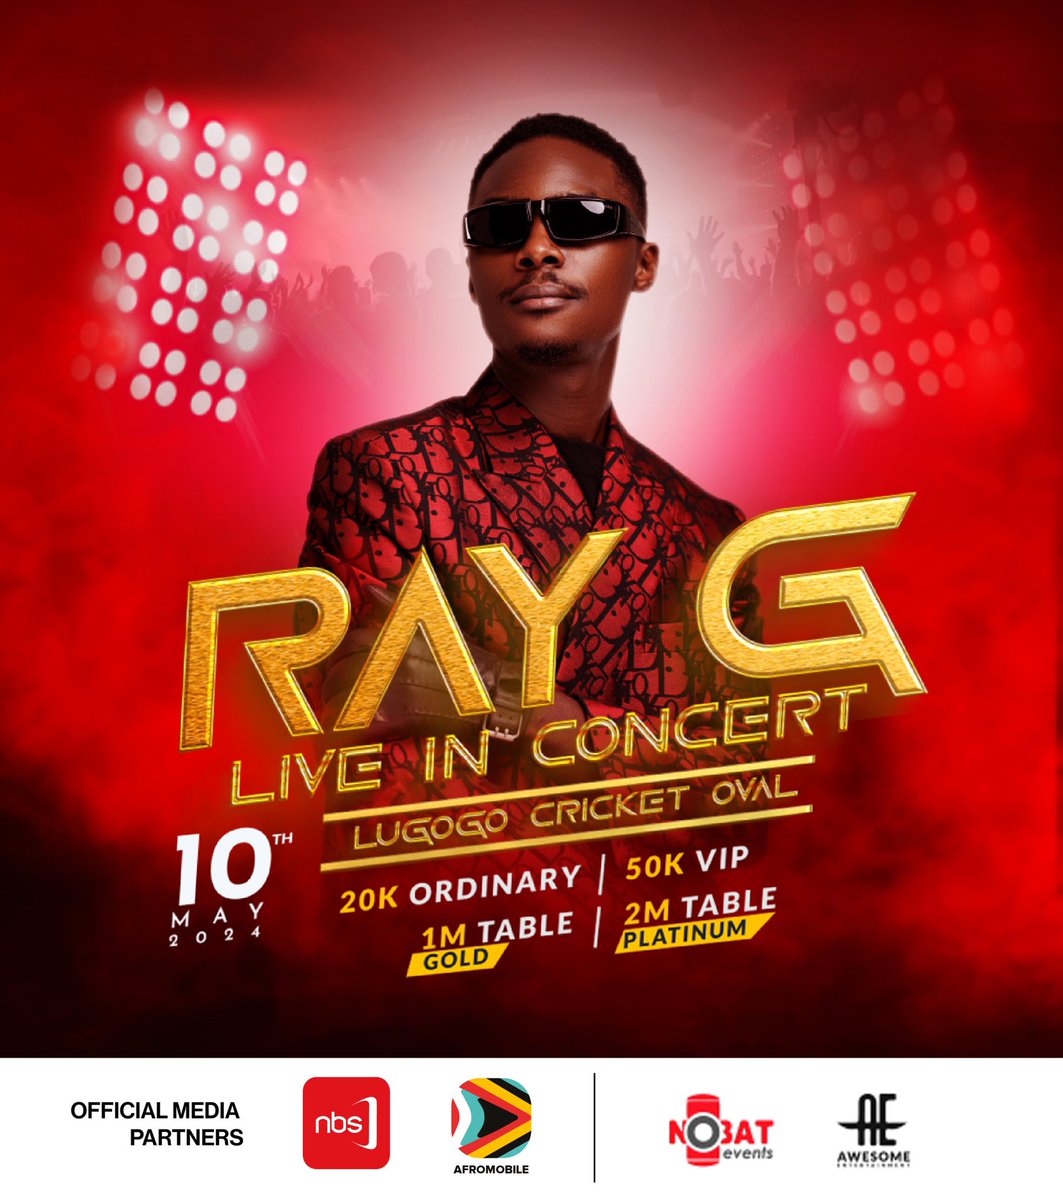 Experience the thrill of live music! #RayGLiveInConcert hits Lugogo Cricket Oval on May 10th, 2024. Secure your tickets now for a night to remember! #SanyukaUpdates